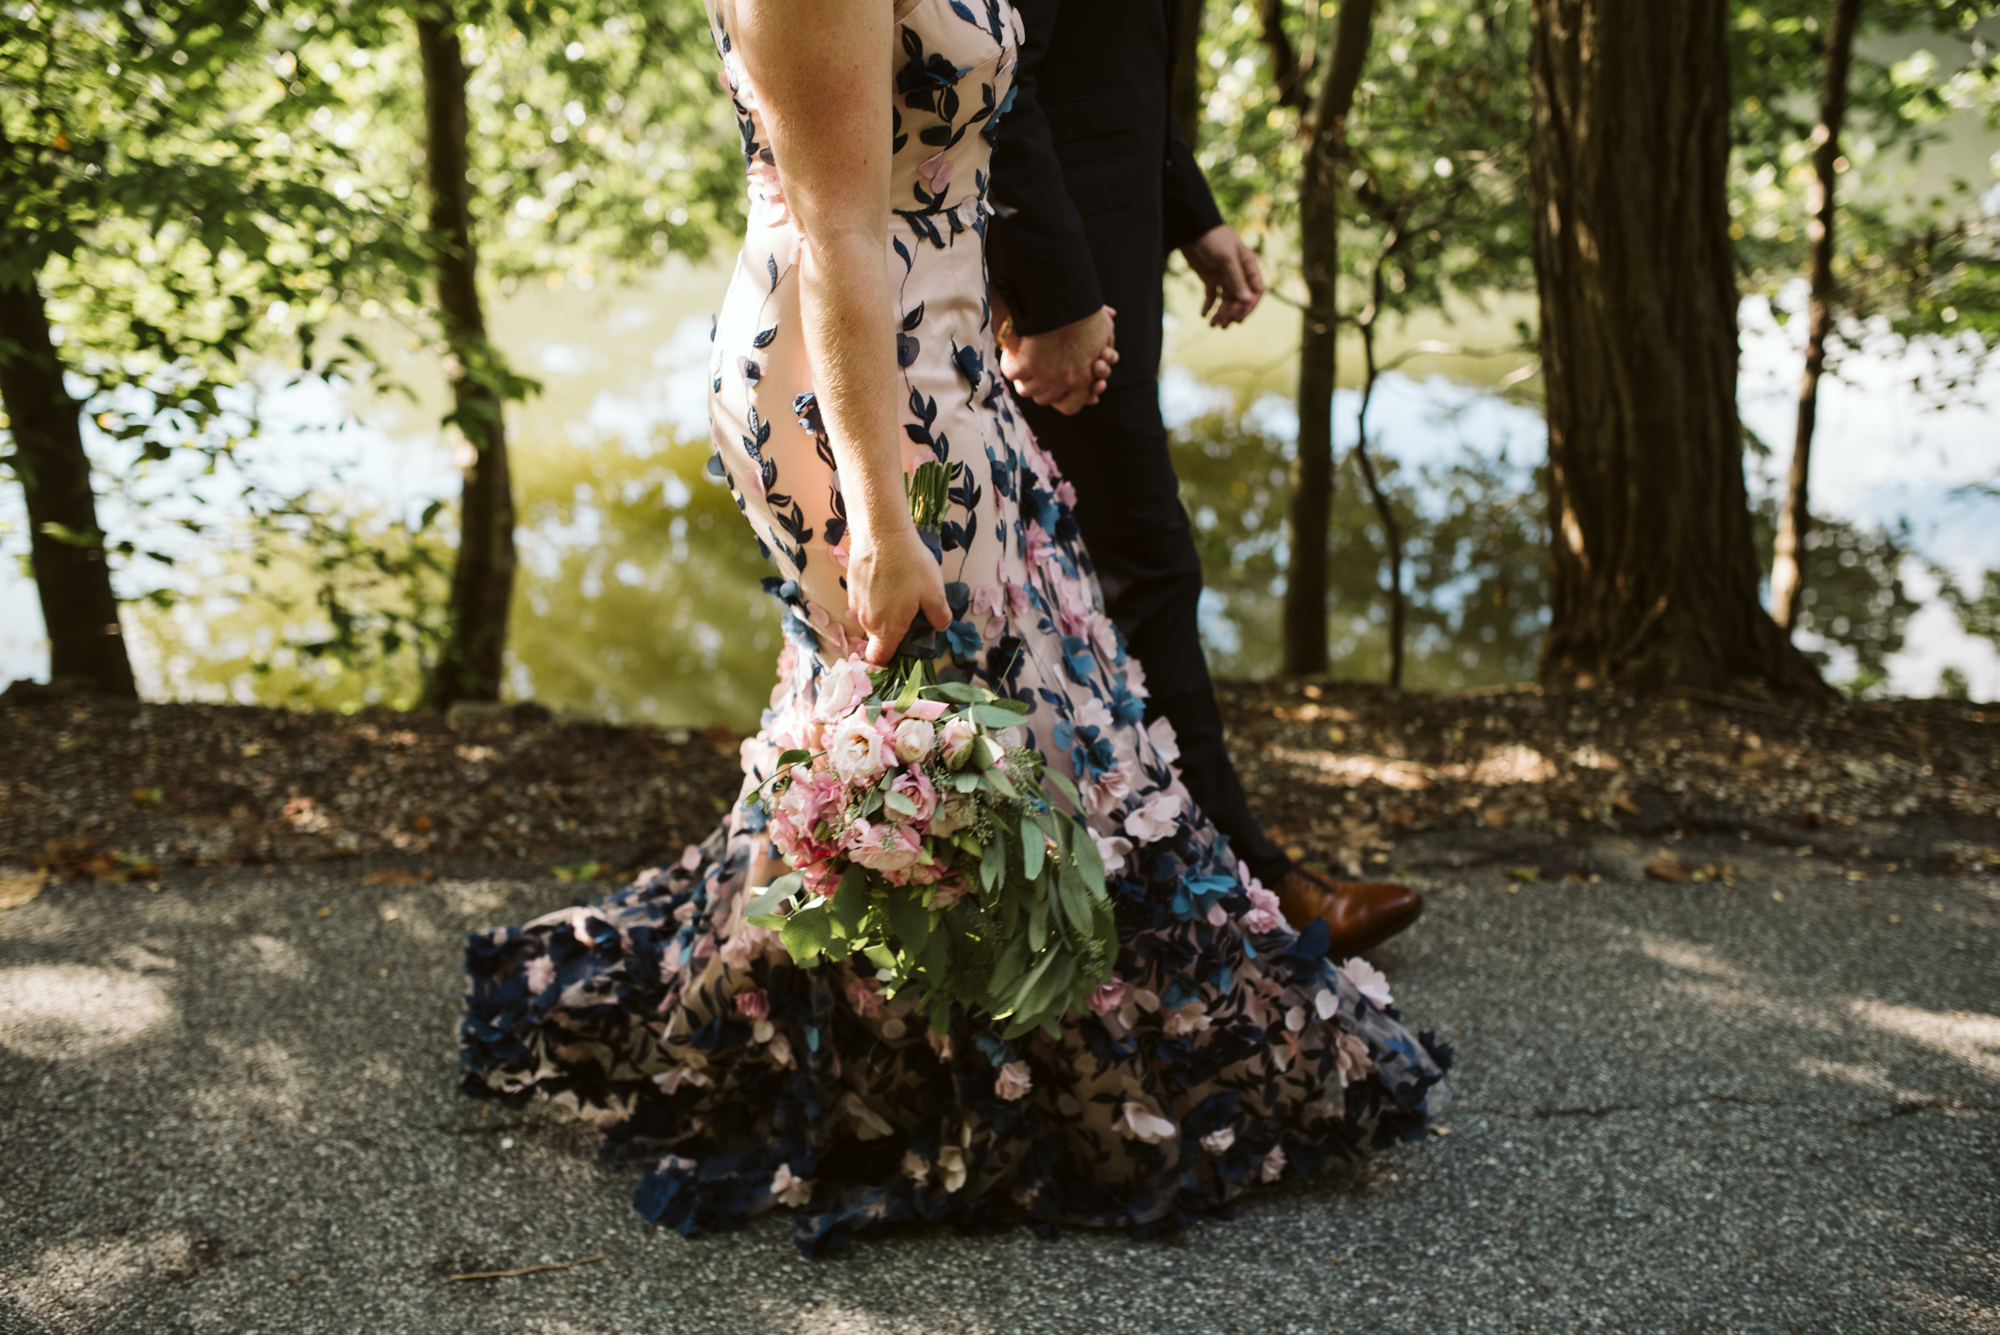 Pop-up Ceremony, Outdoor Wedding, Casual, Simple, Lake Roland, Baltimore, Maryland Wedding Photographer, Laid Back, Bride and Groom Walking, Marchesa Notte Dress, DIY Flowers